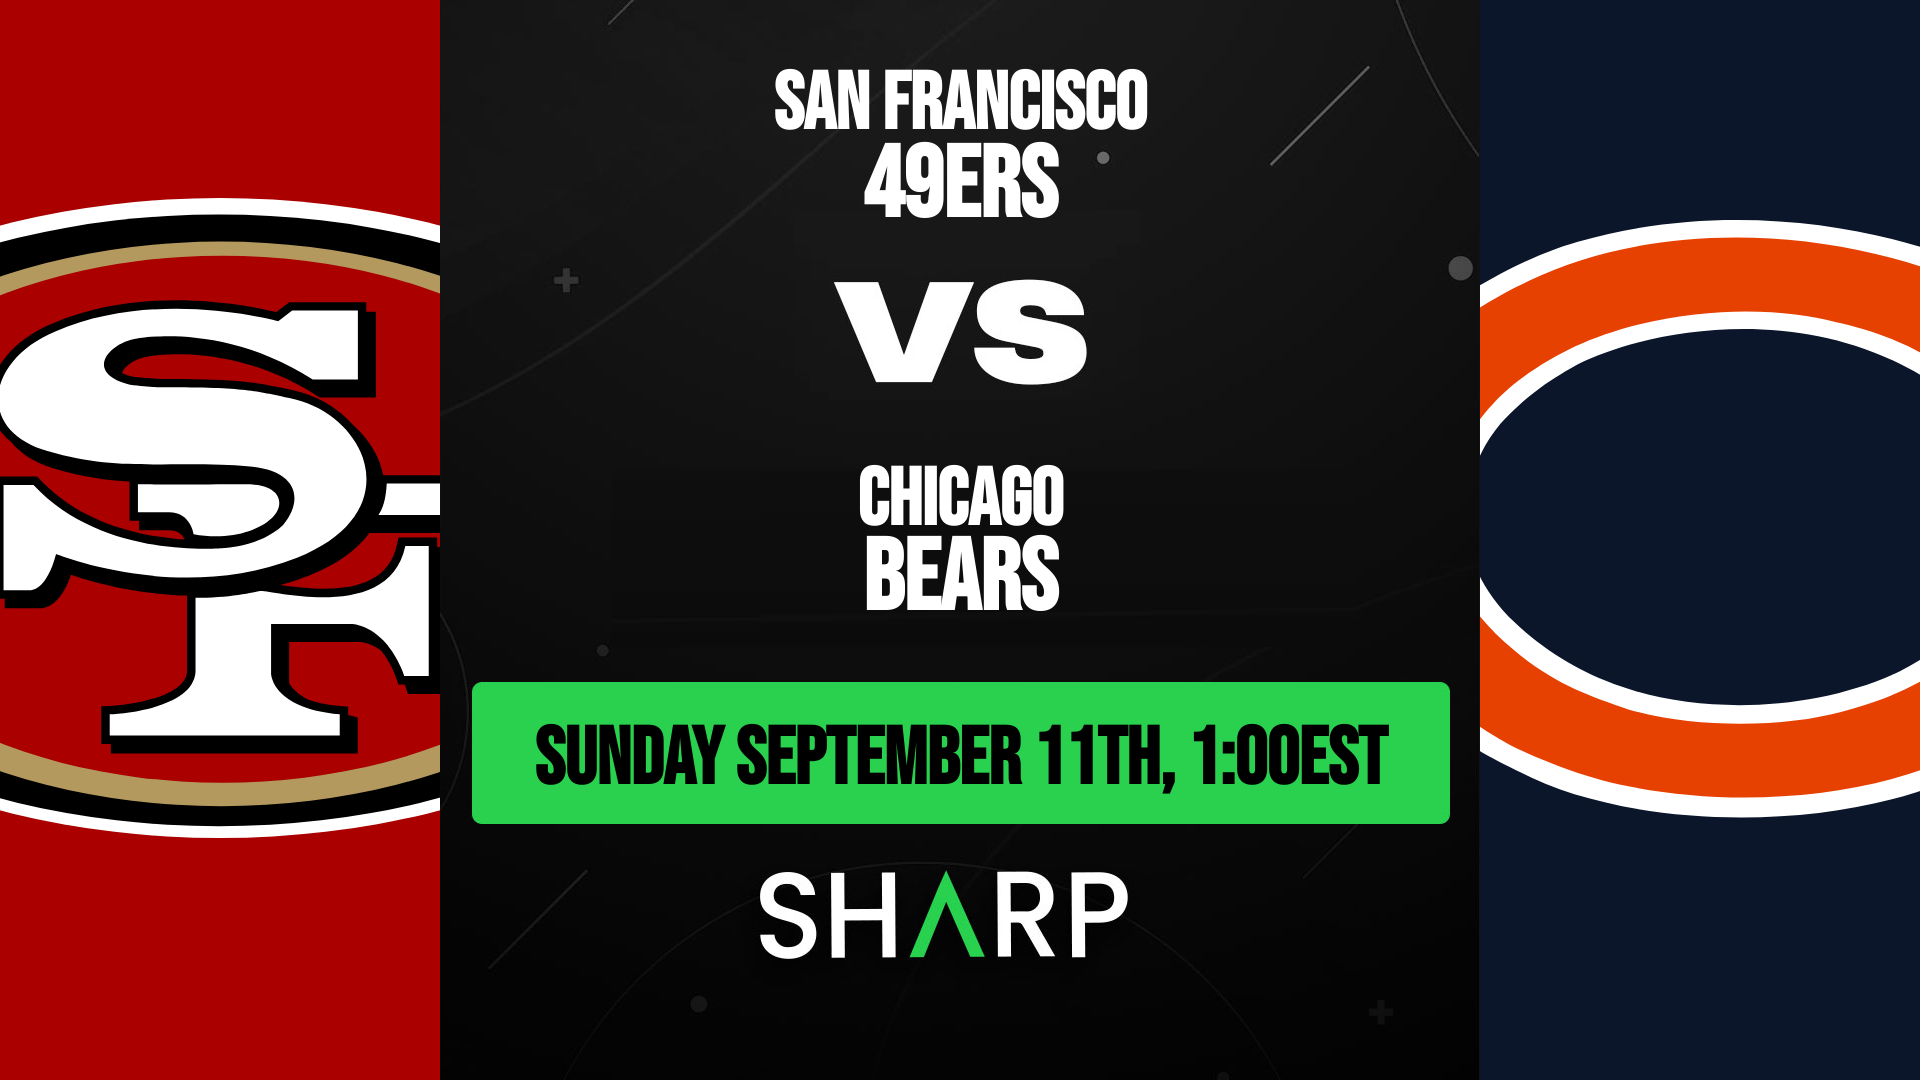 San Francisco 49ers @ Chicago Bears Matchup Preview - September 11th, 2022